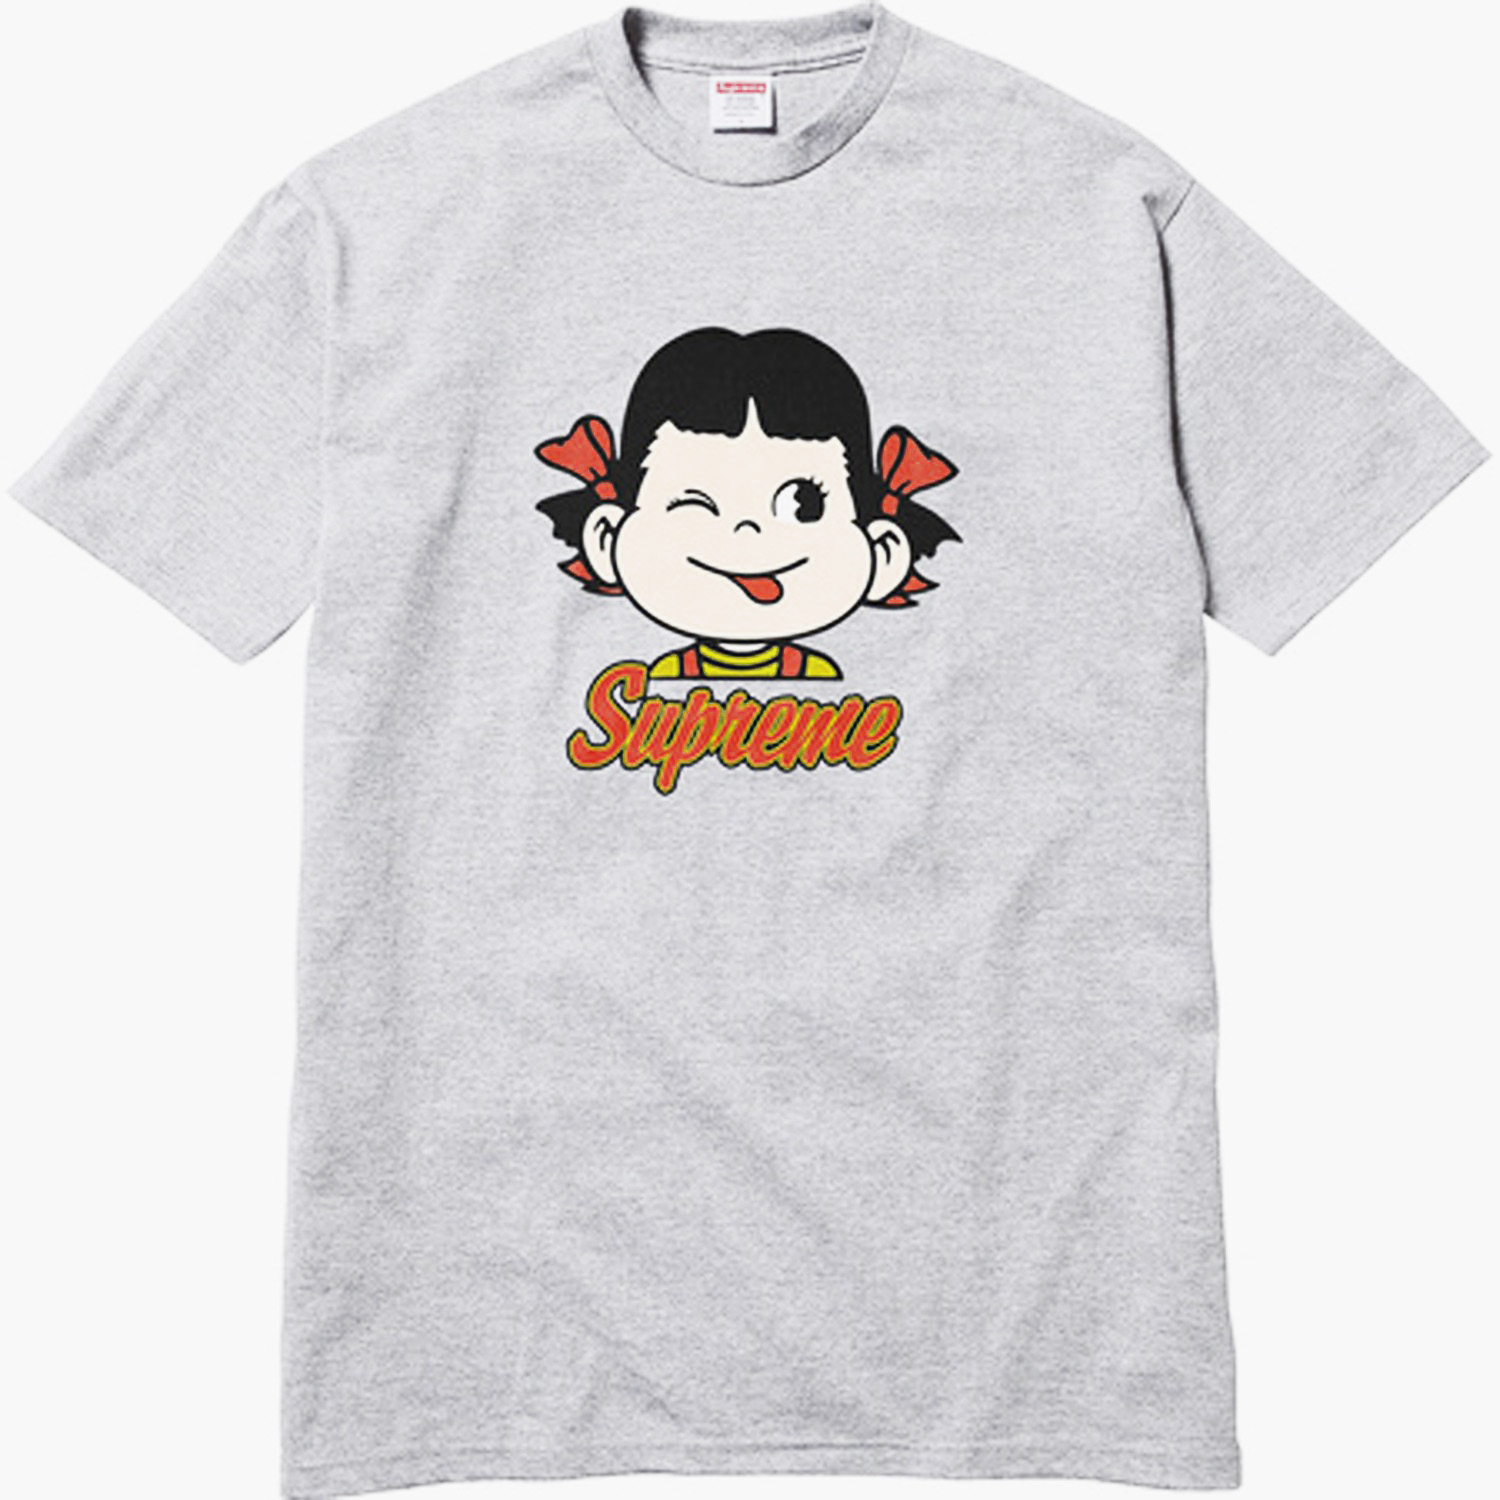 Supreme Candy Tee Grey Men's - SS15 - US